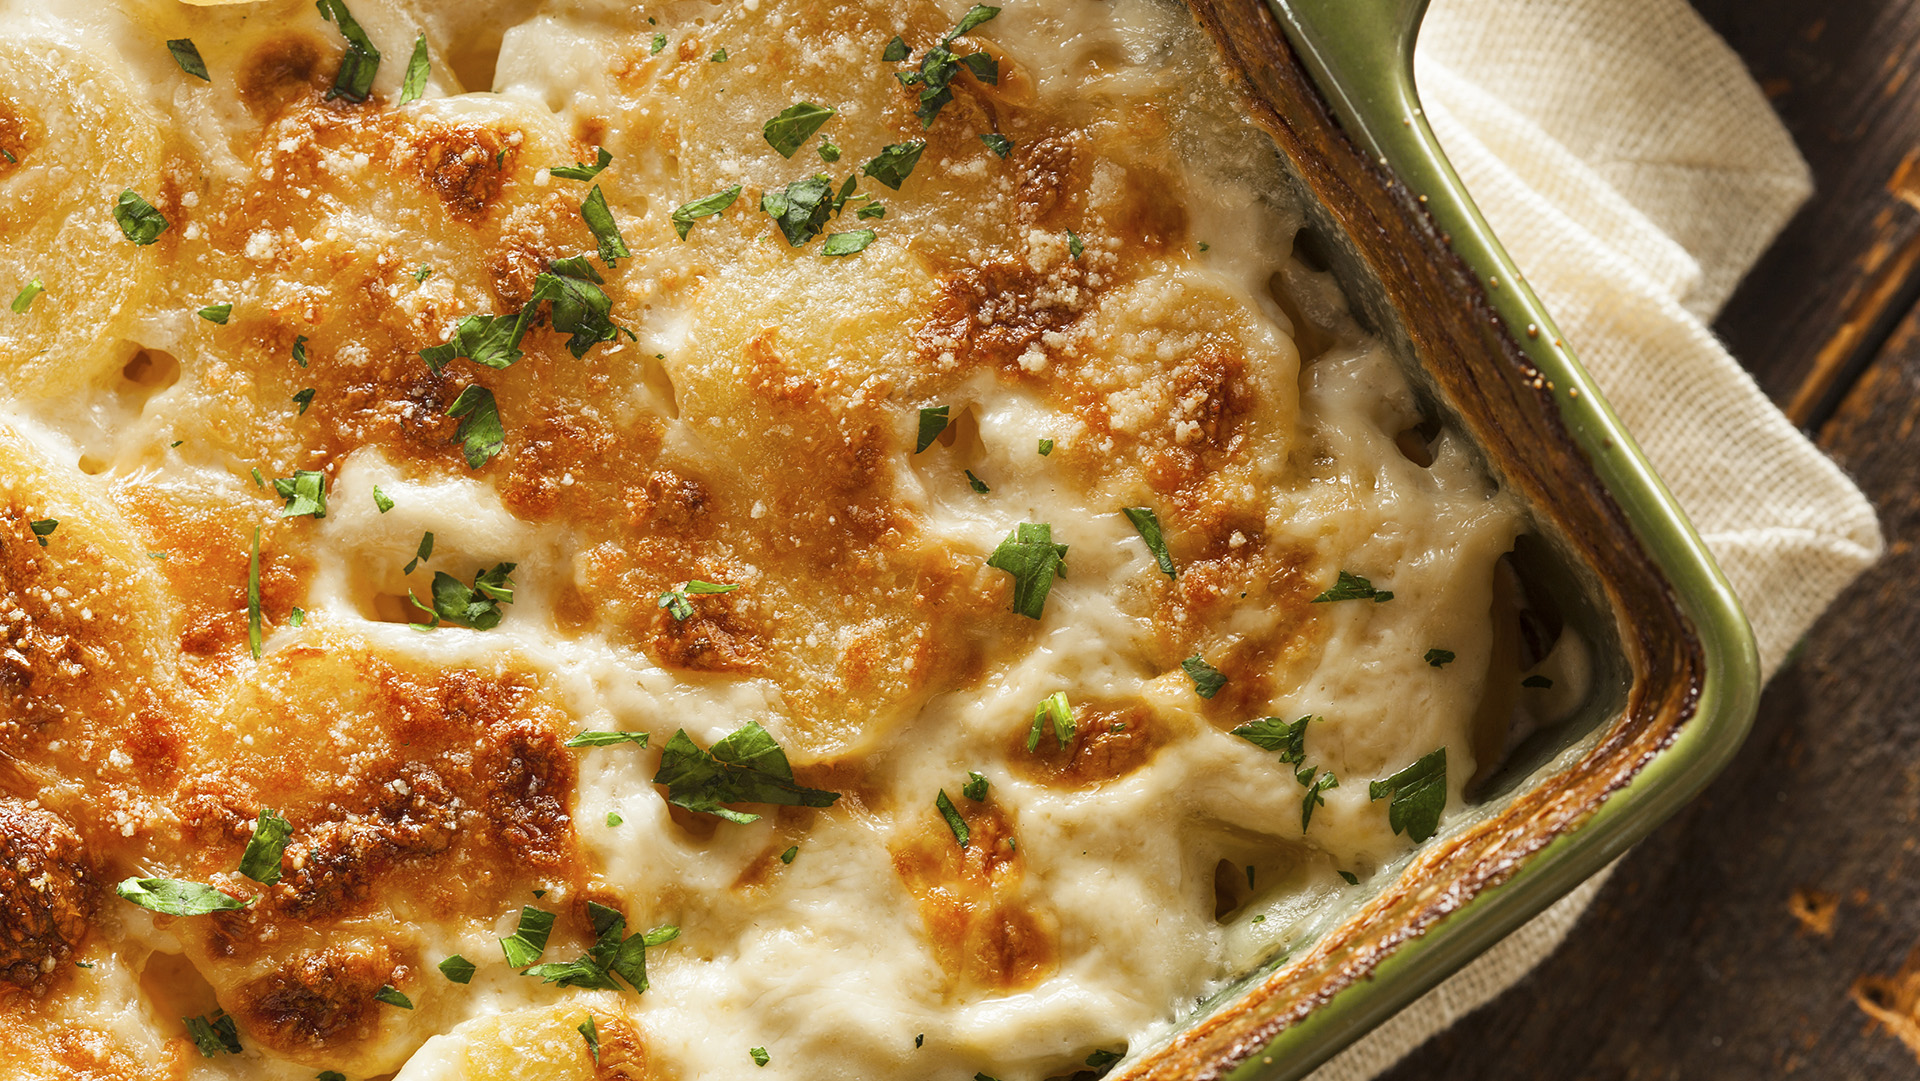 Homemade Cheesey Scalloped Potatoes with Parsley Flakes